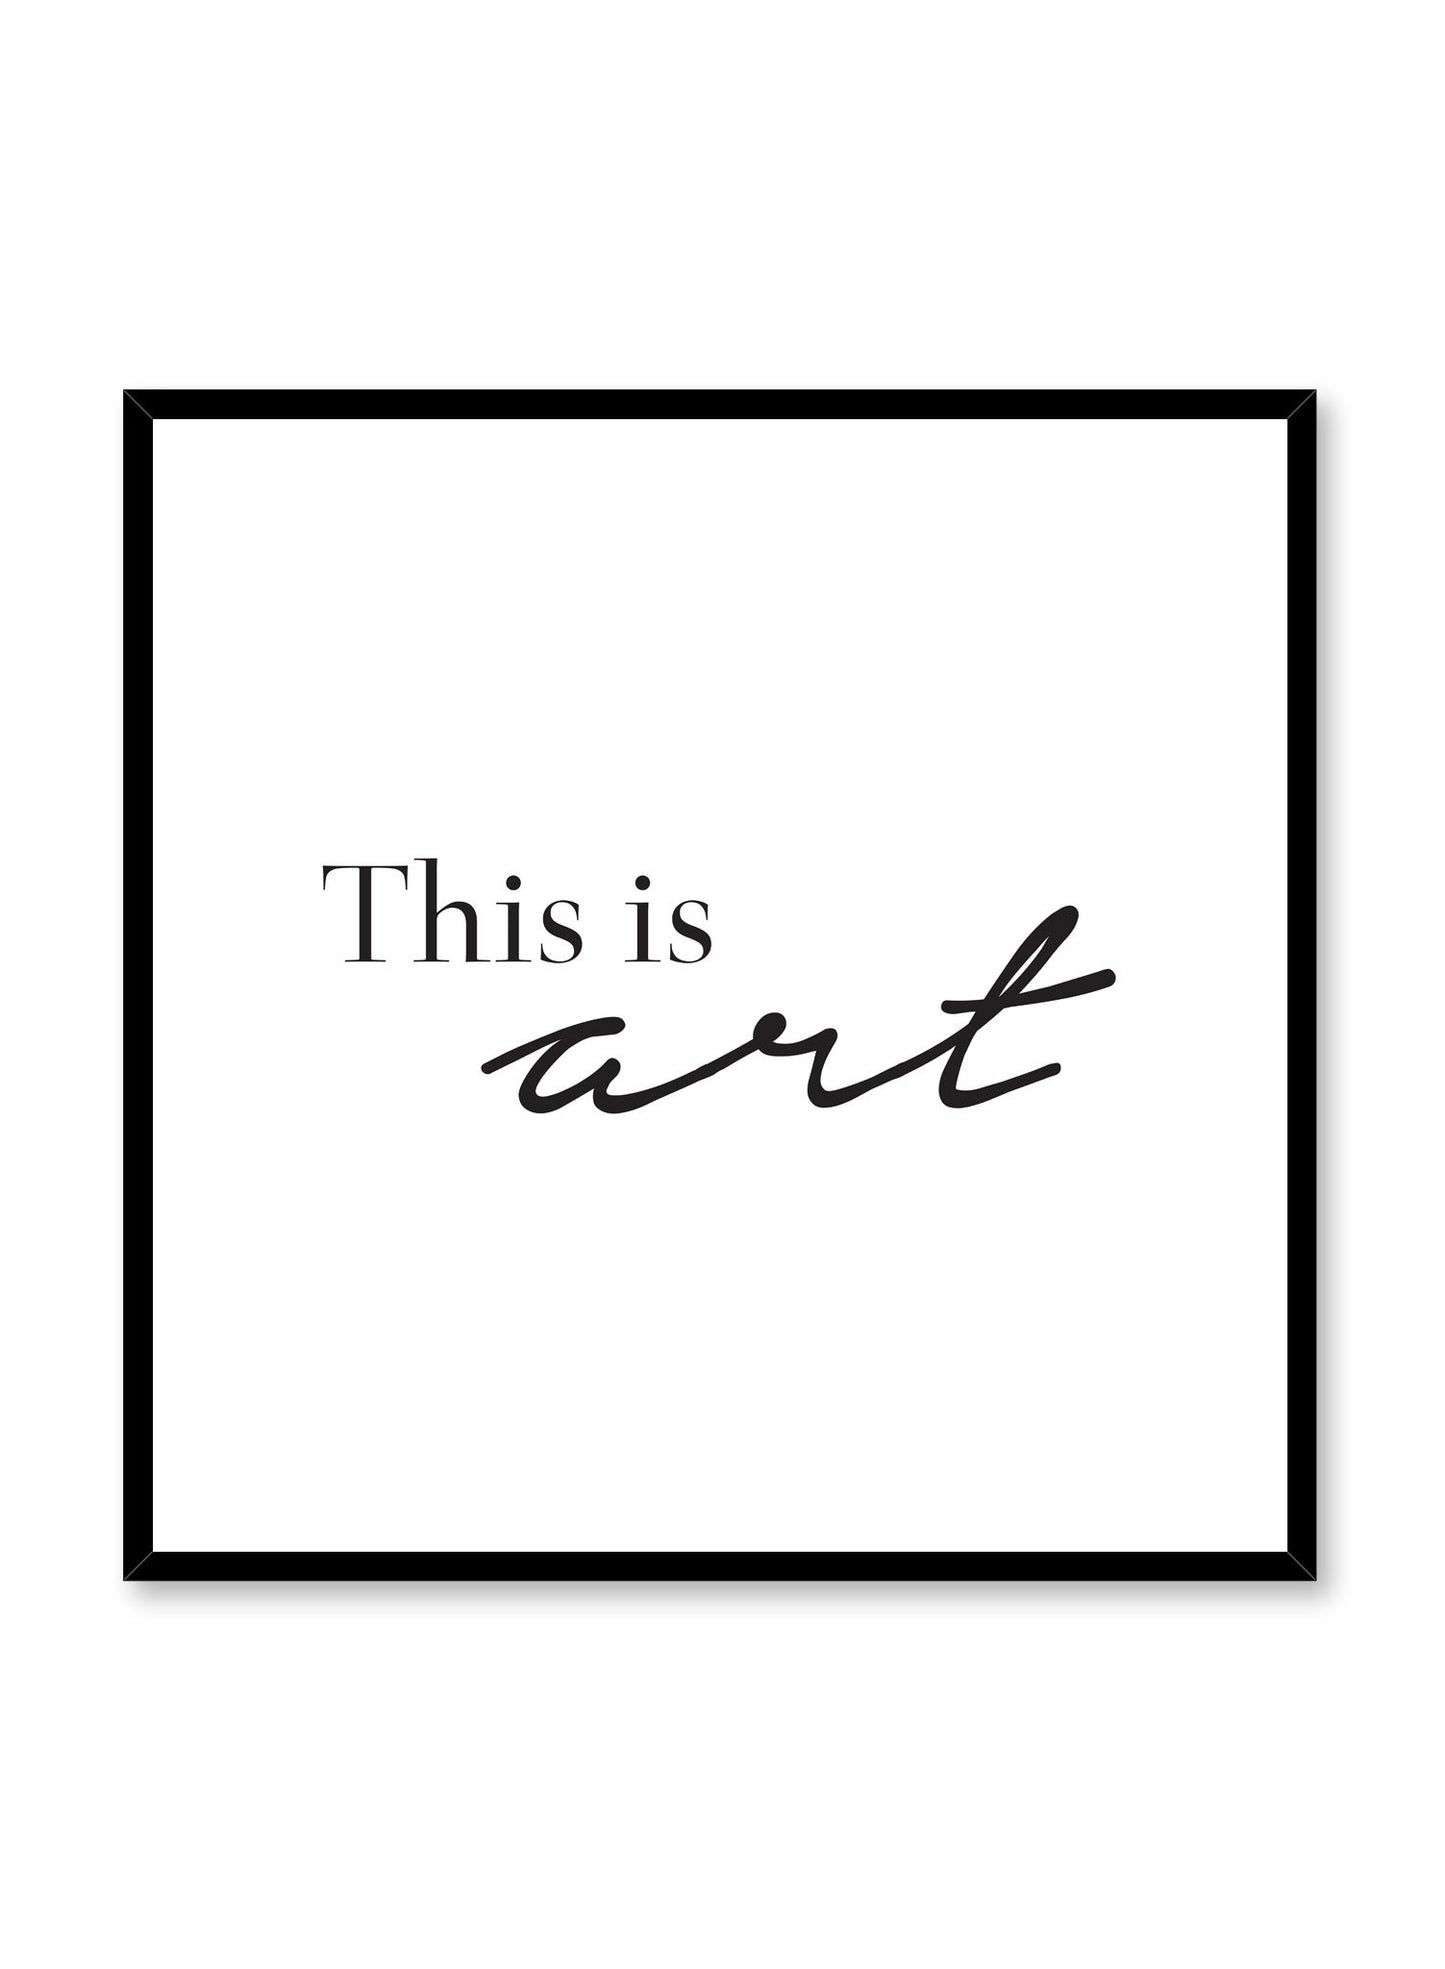 Modern minimalist art print by Opposite Wall with this is art text in square format